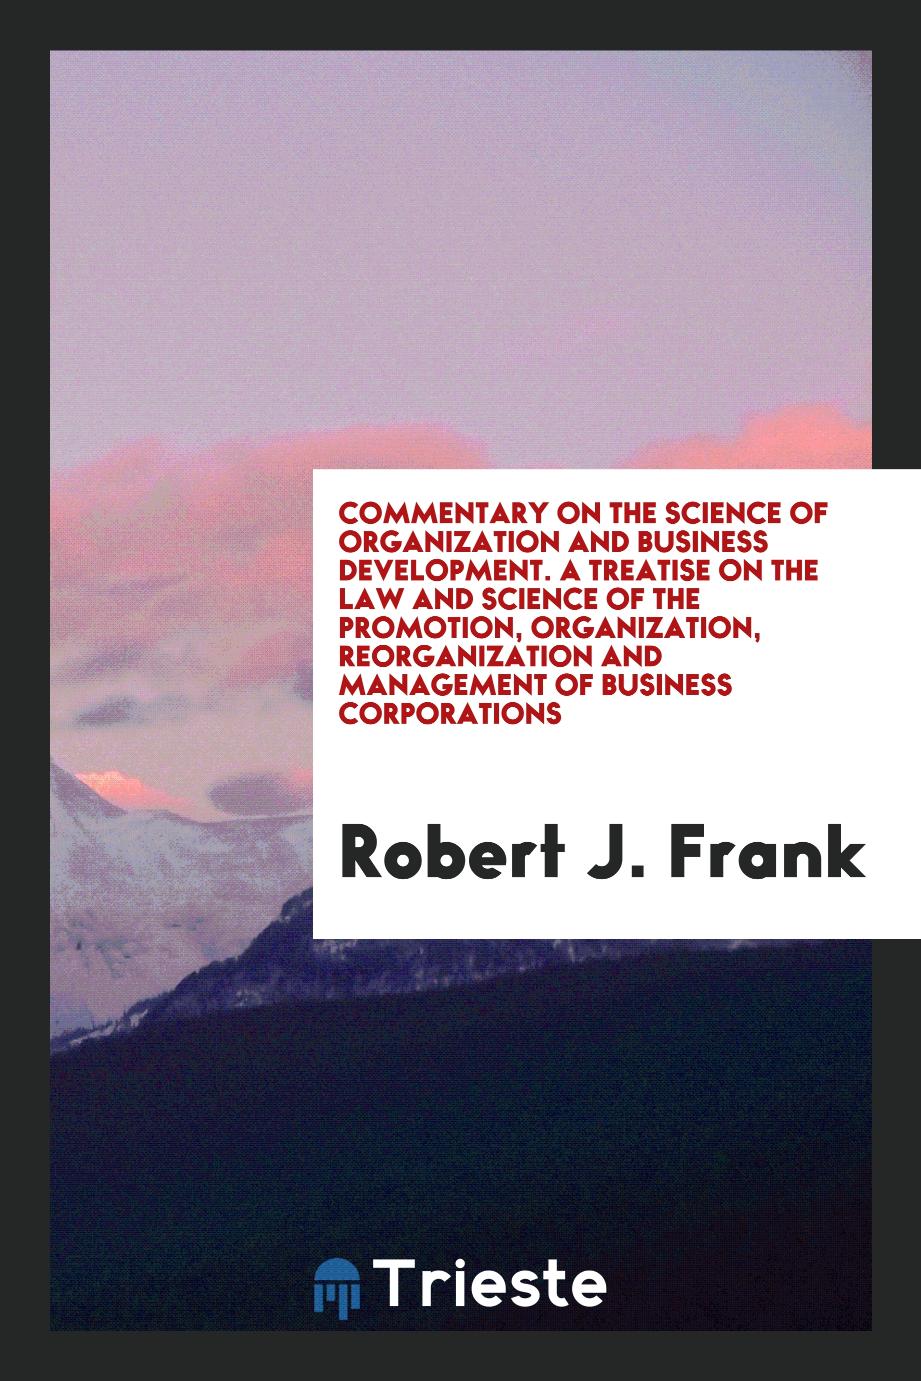 Commentary on the science of organization and business development. A treatise on the law and science of the promotion, organization, reorganization and management of business corporations